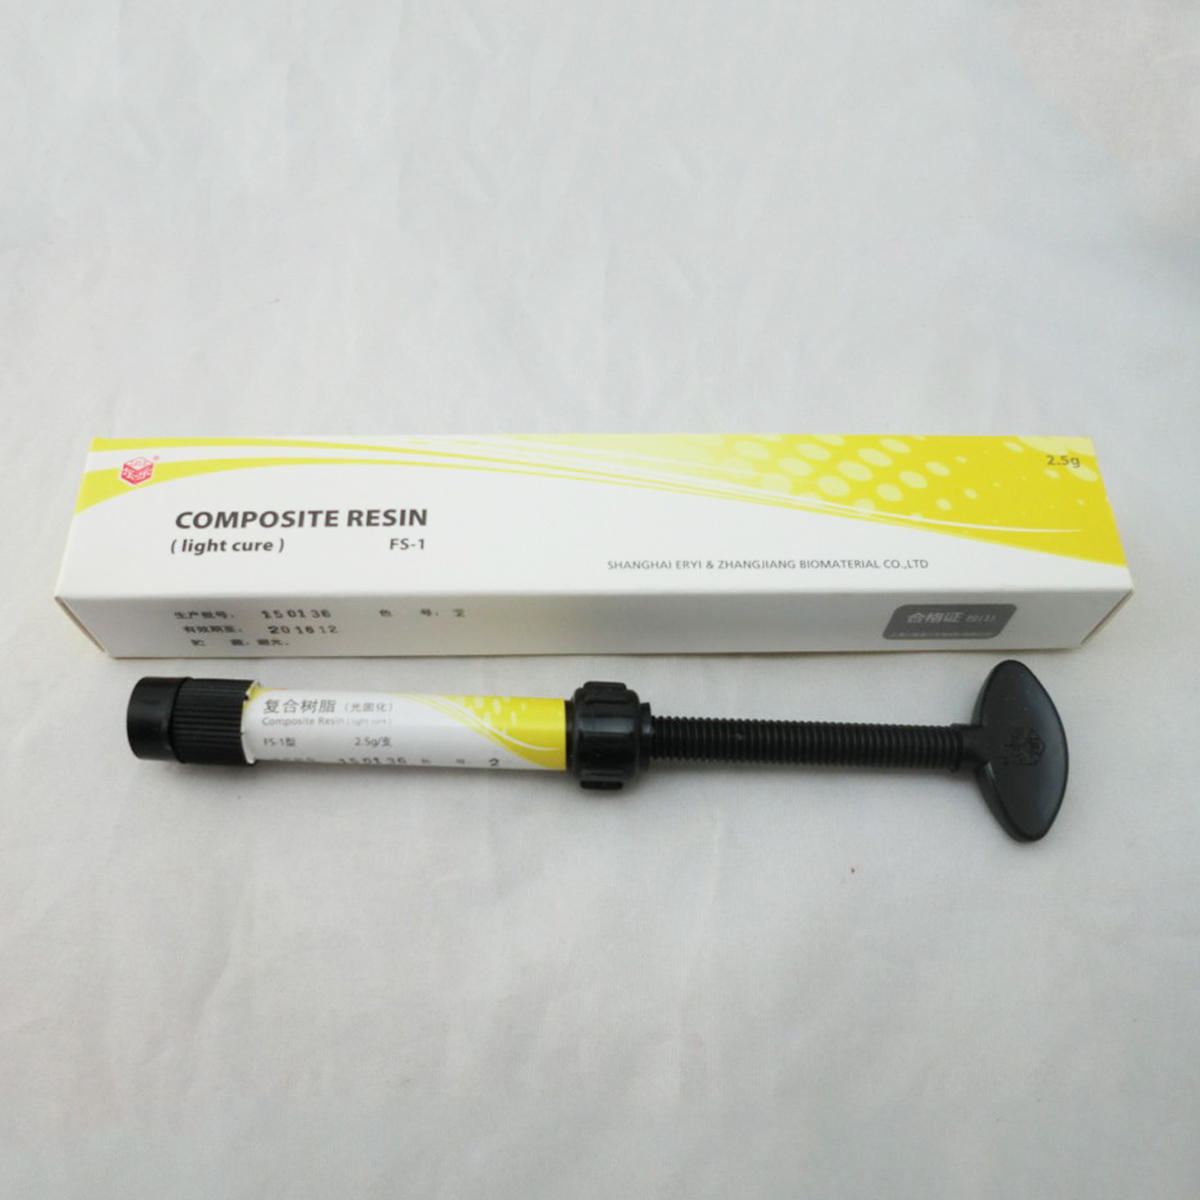 Dental Temporary Light Cure Tool Material Filling Inlay Composite Resin 2.5g